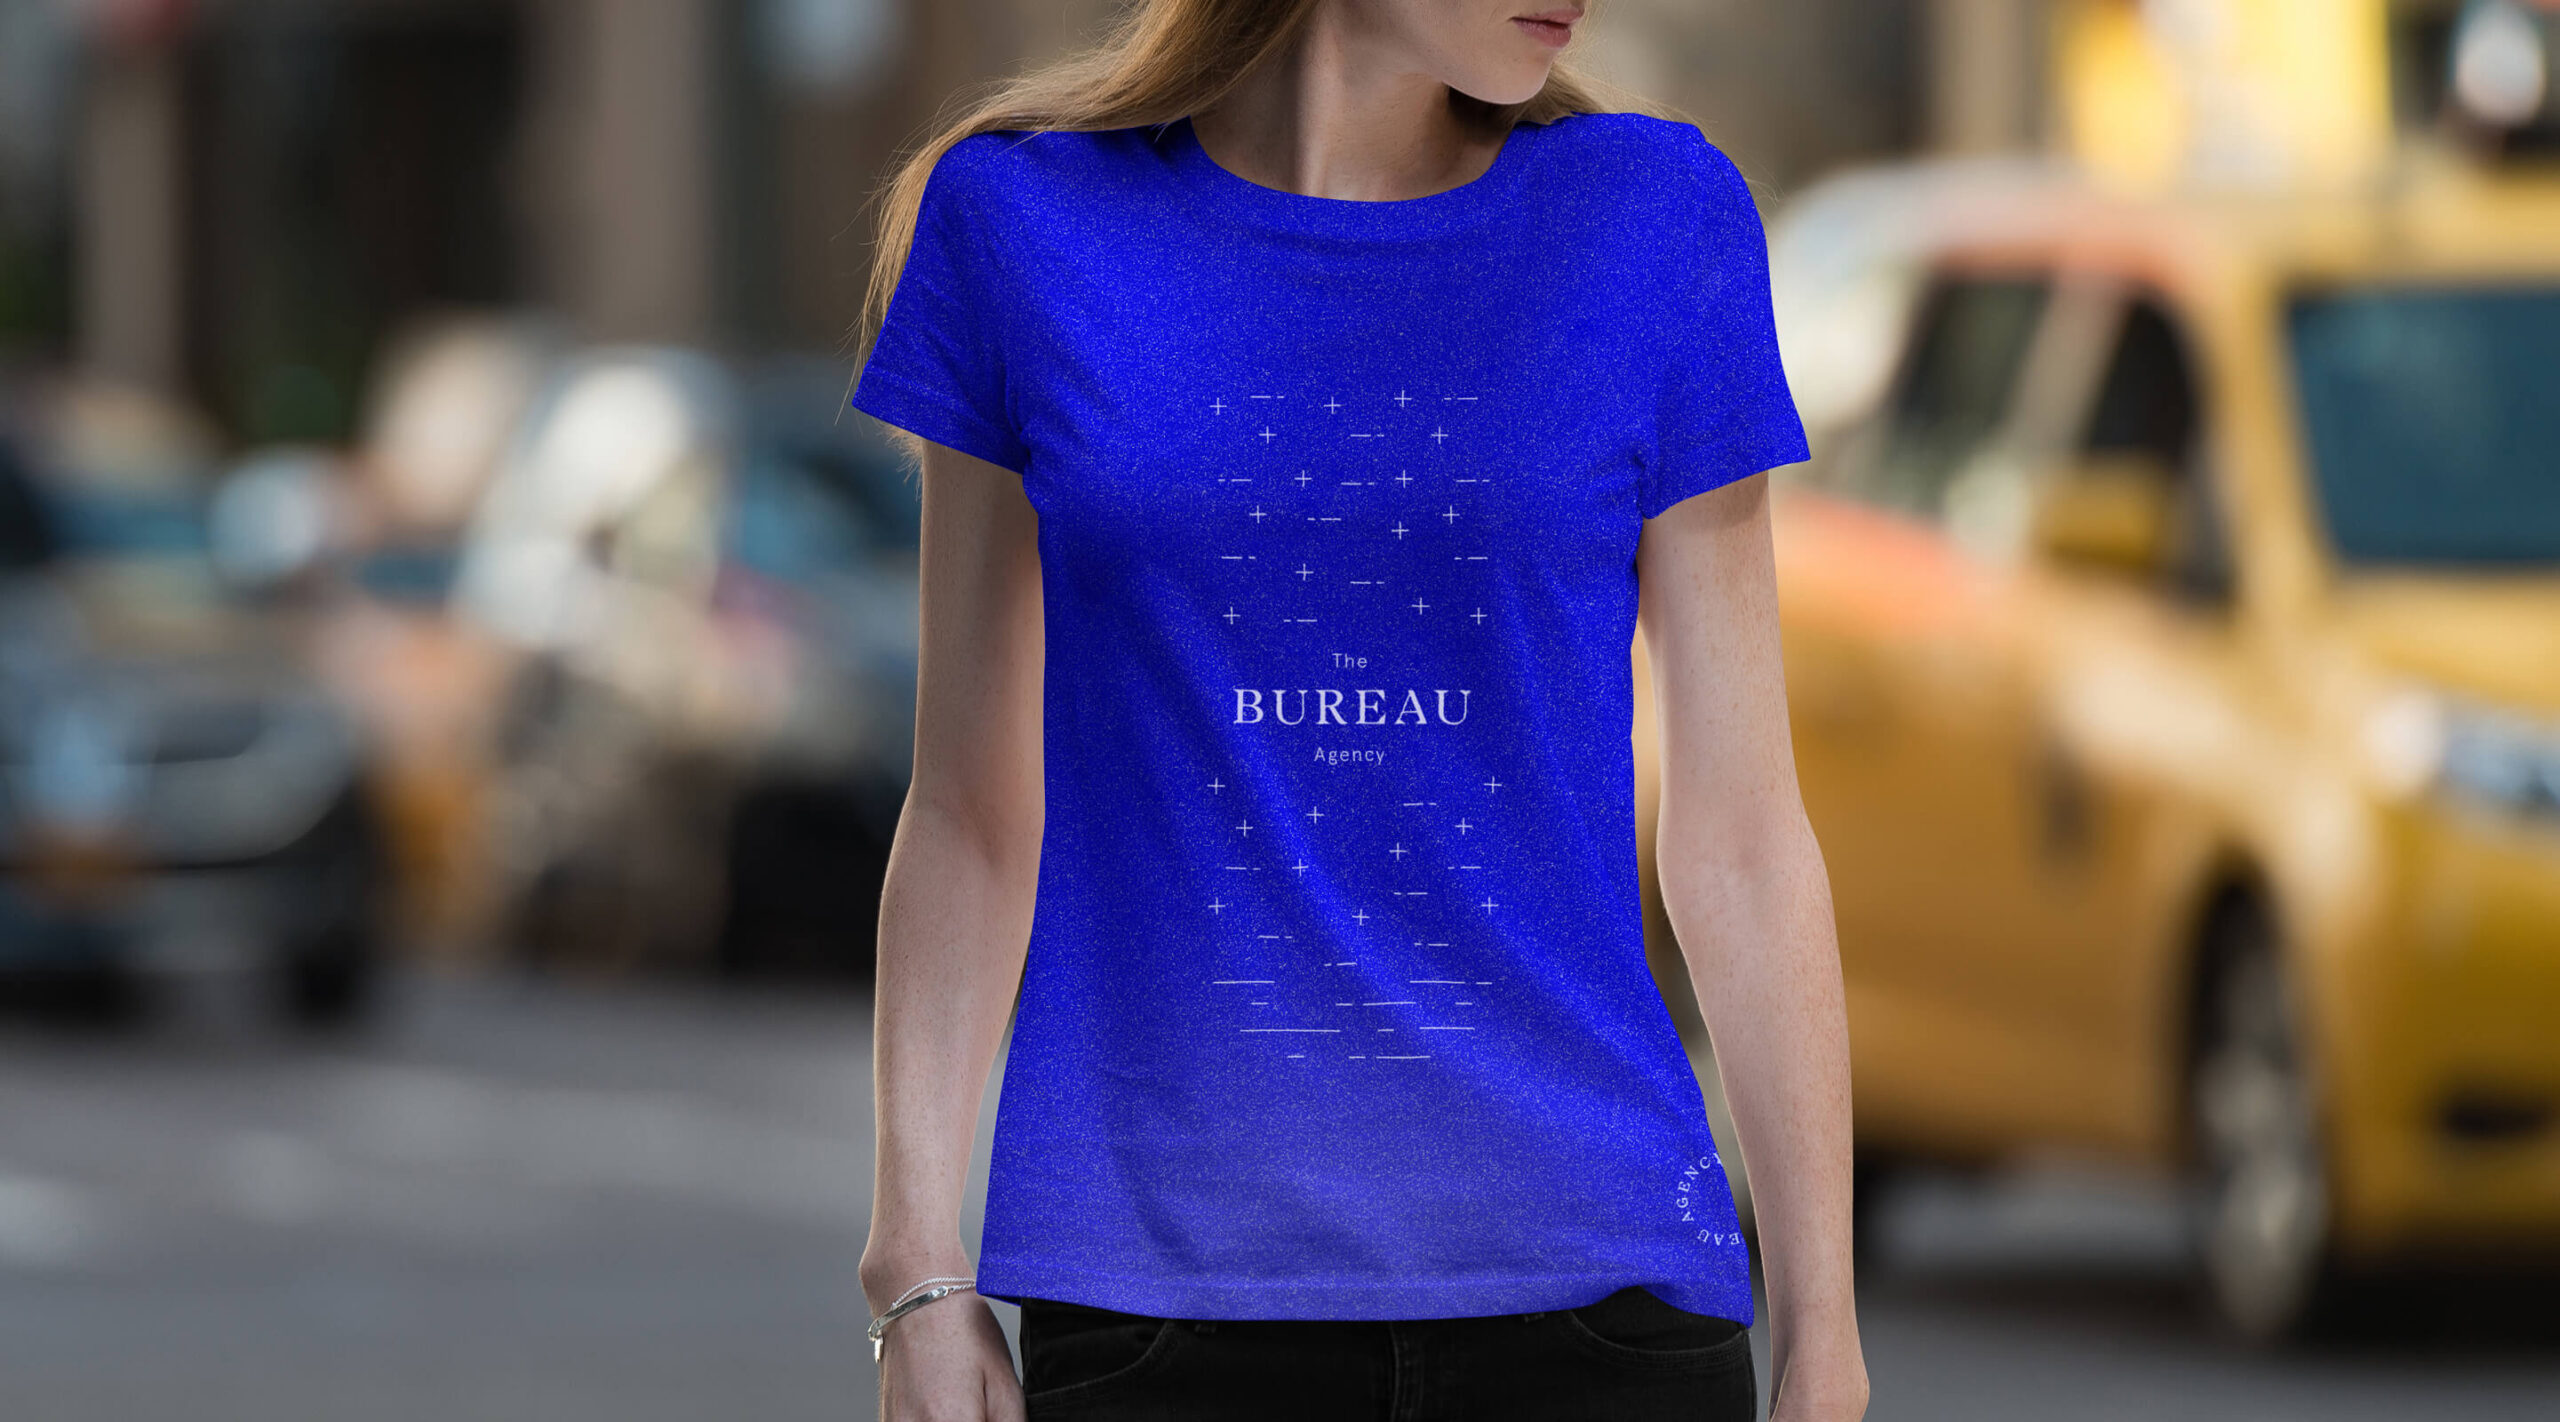 Girl wearing a branded bright blue t-shirt and walking in the streets of New York